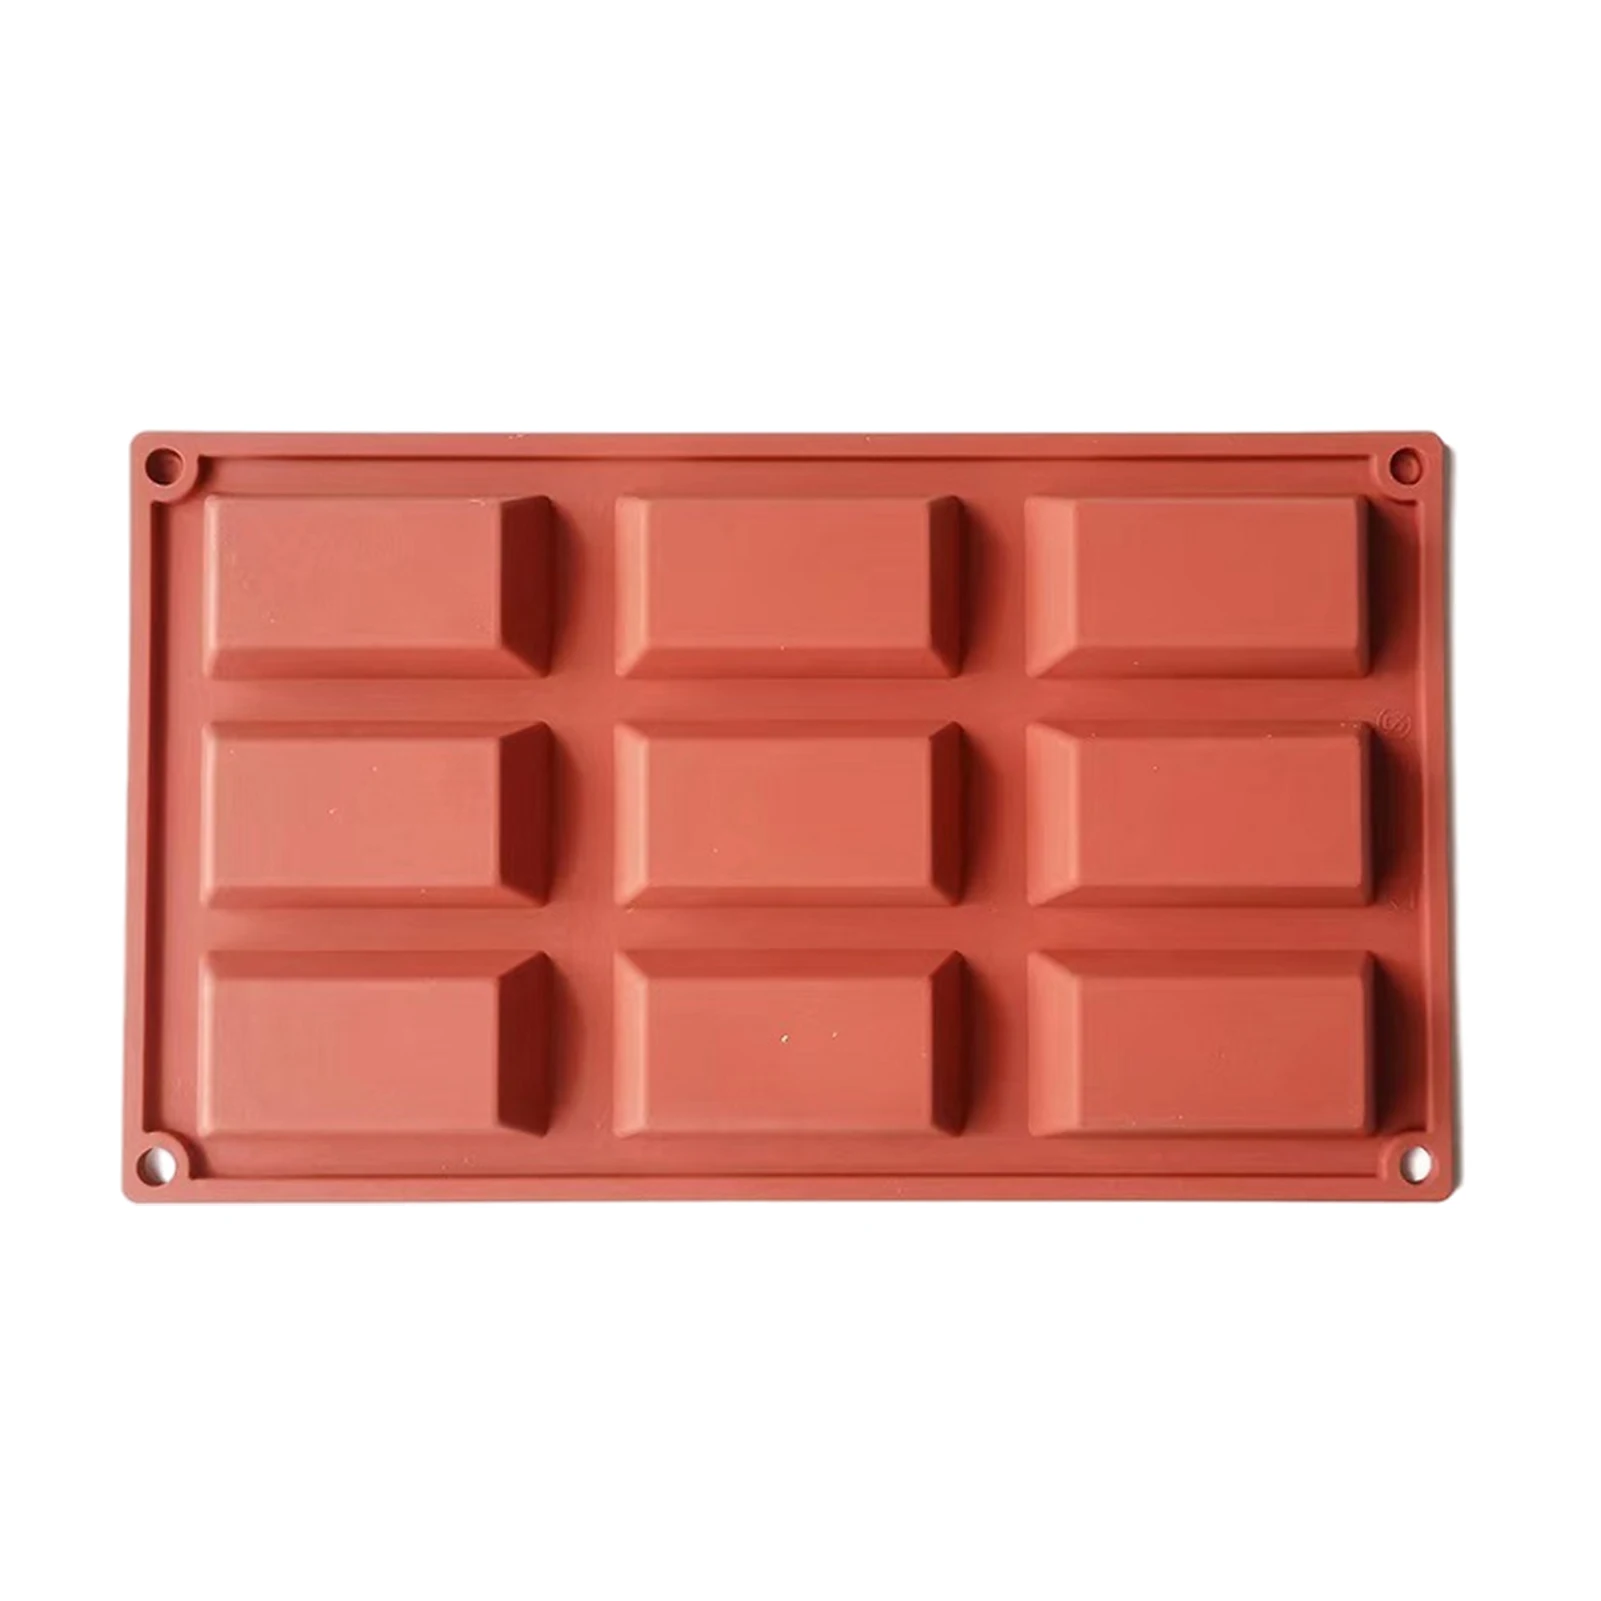 

9-Cavity Financier Cake Mold Rectangle Cake Moulds Mini Loaf Pan Baking Mold For Bread Meatloaf Brownie Cornbread Muffin